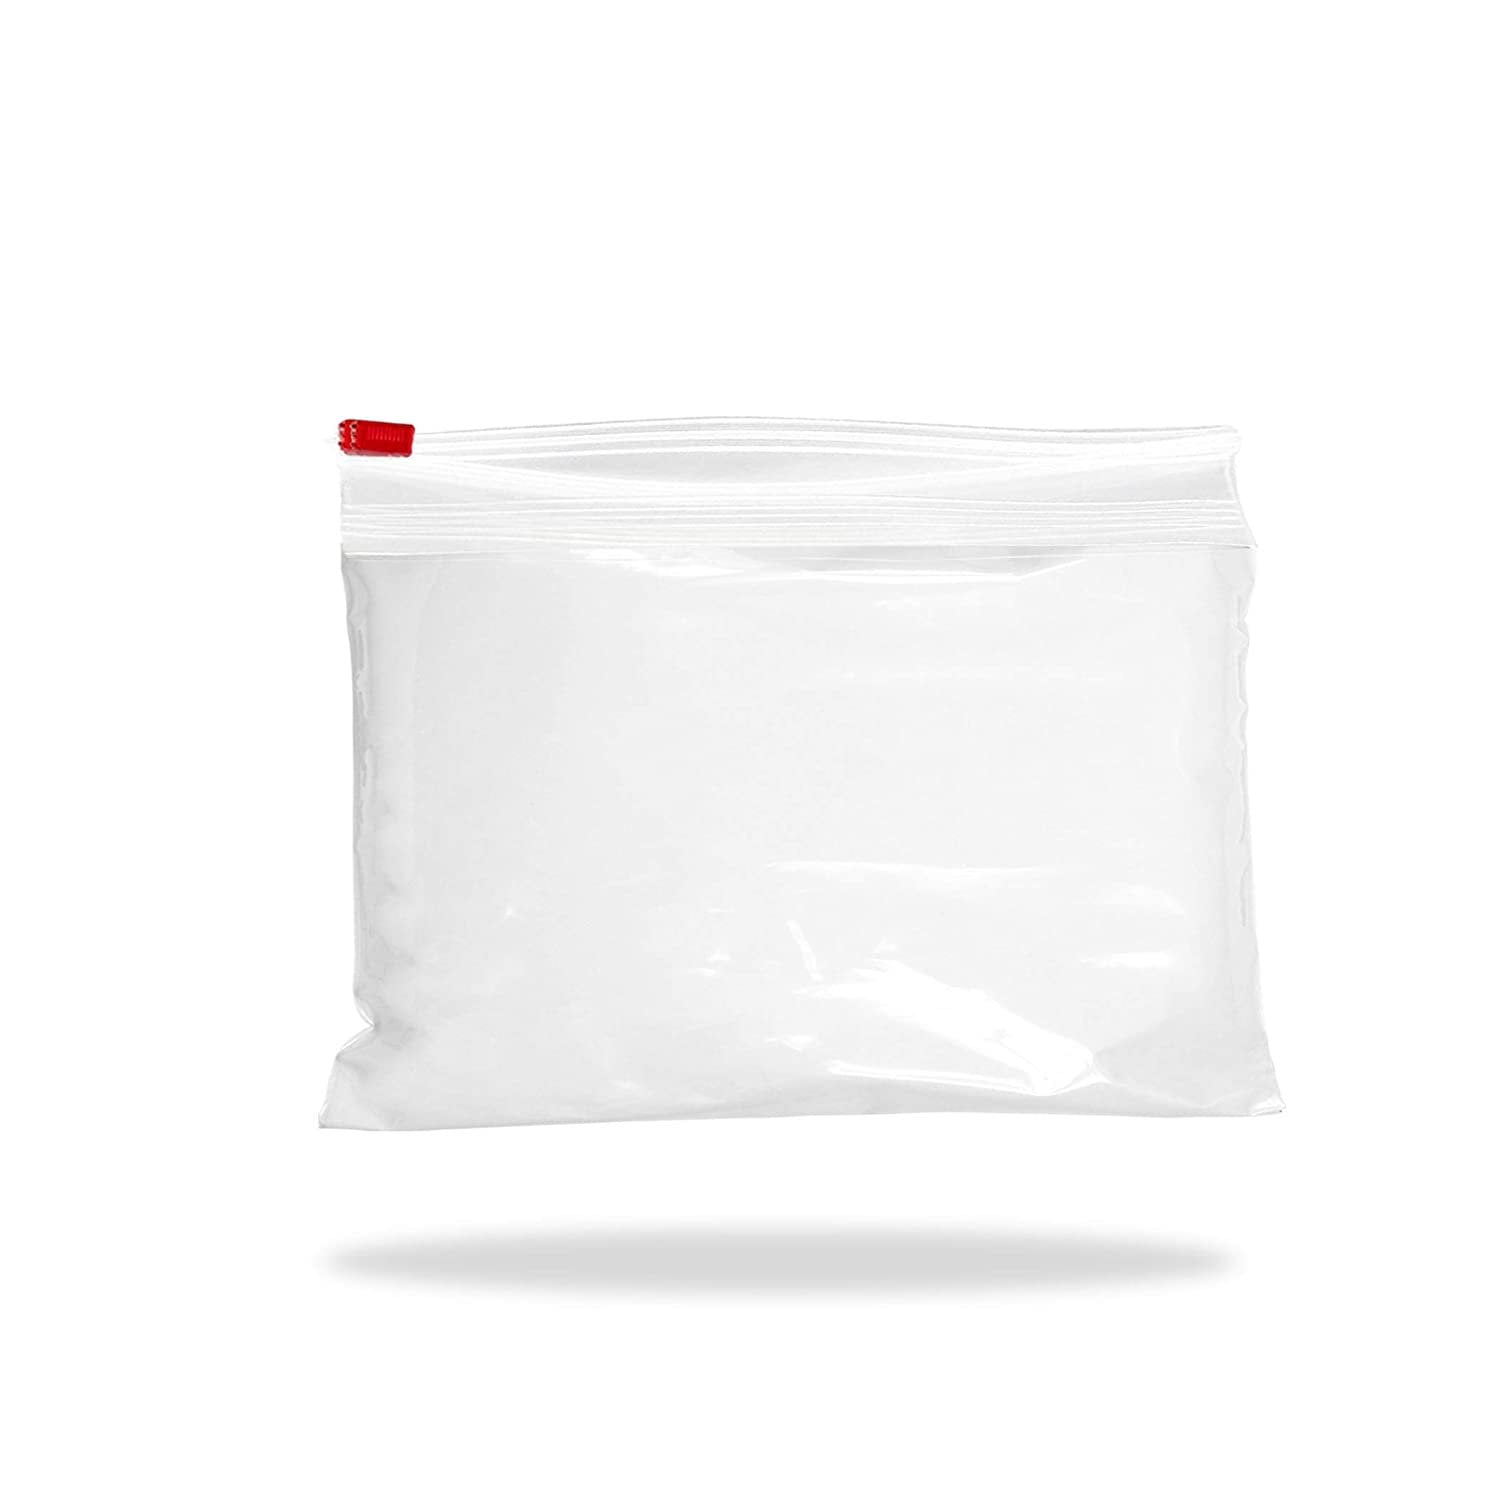 100 x HEAVY DUTY 8x10" CLEAR POLYTHENE FOOD USE APPROVED BAGS *200 GAUGE* FAST 